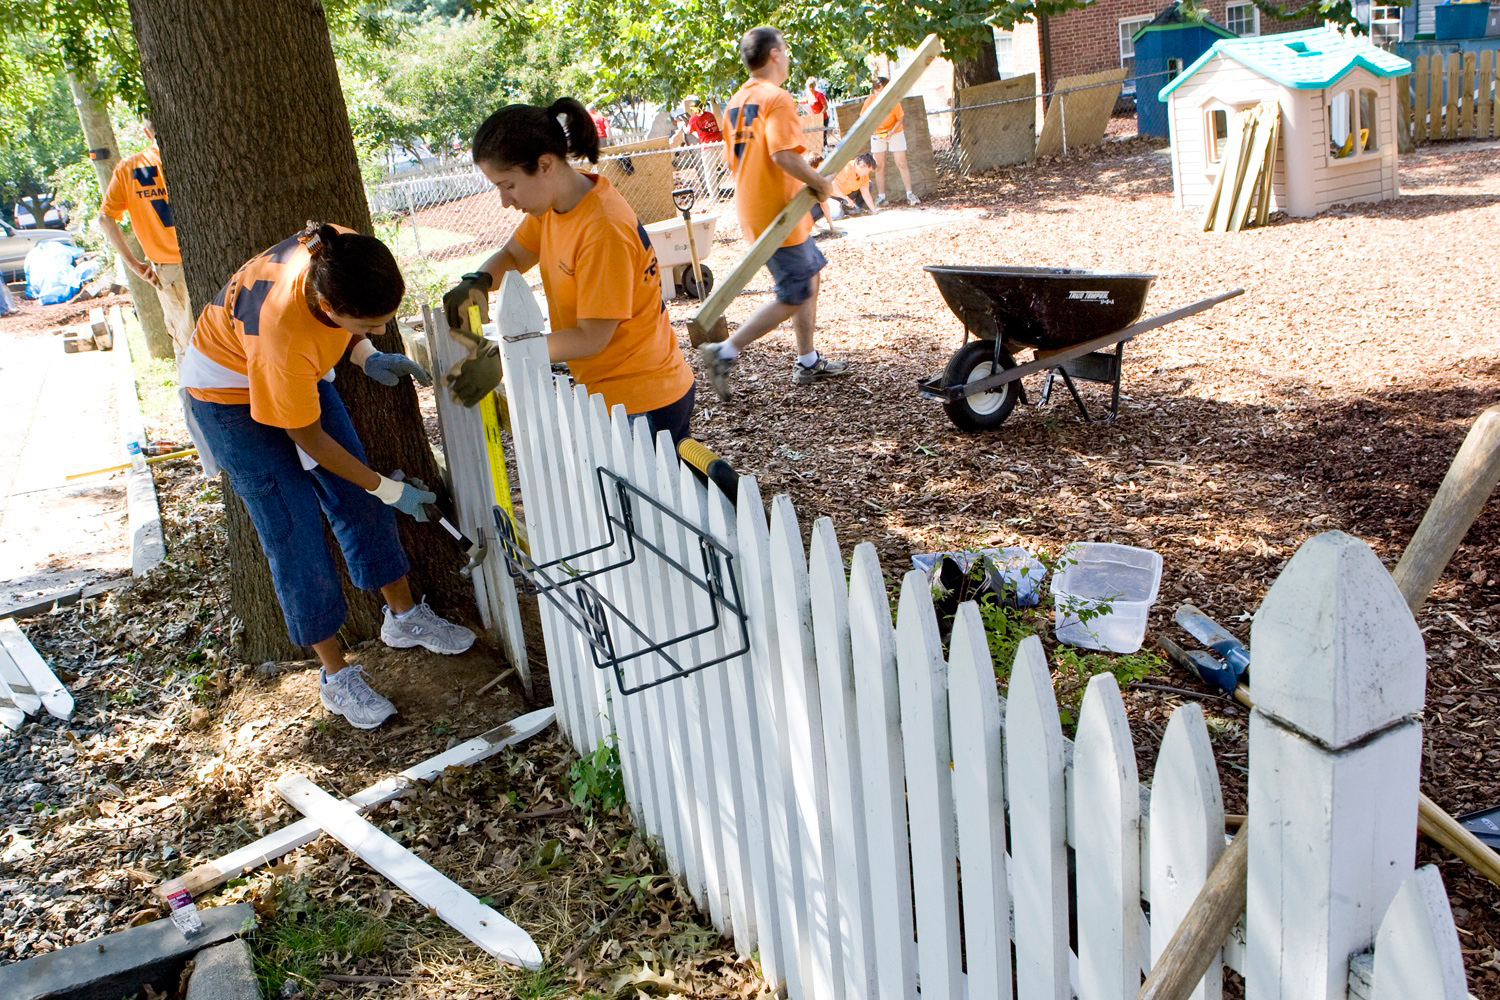 UVA Employees repairing a white picket fence